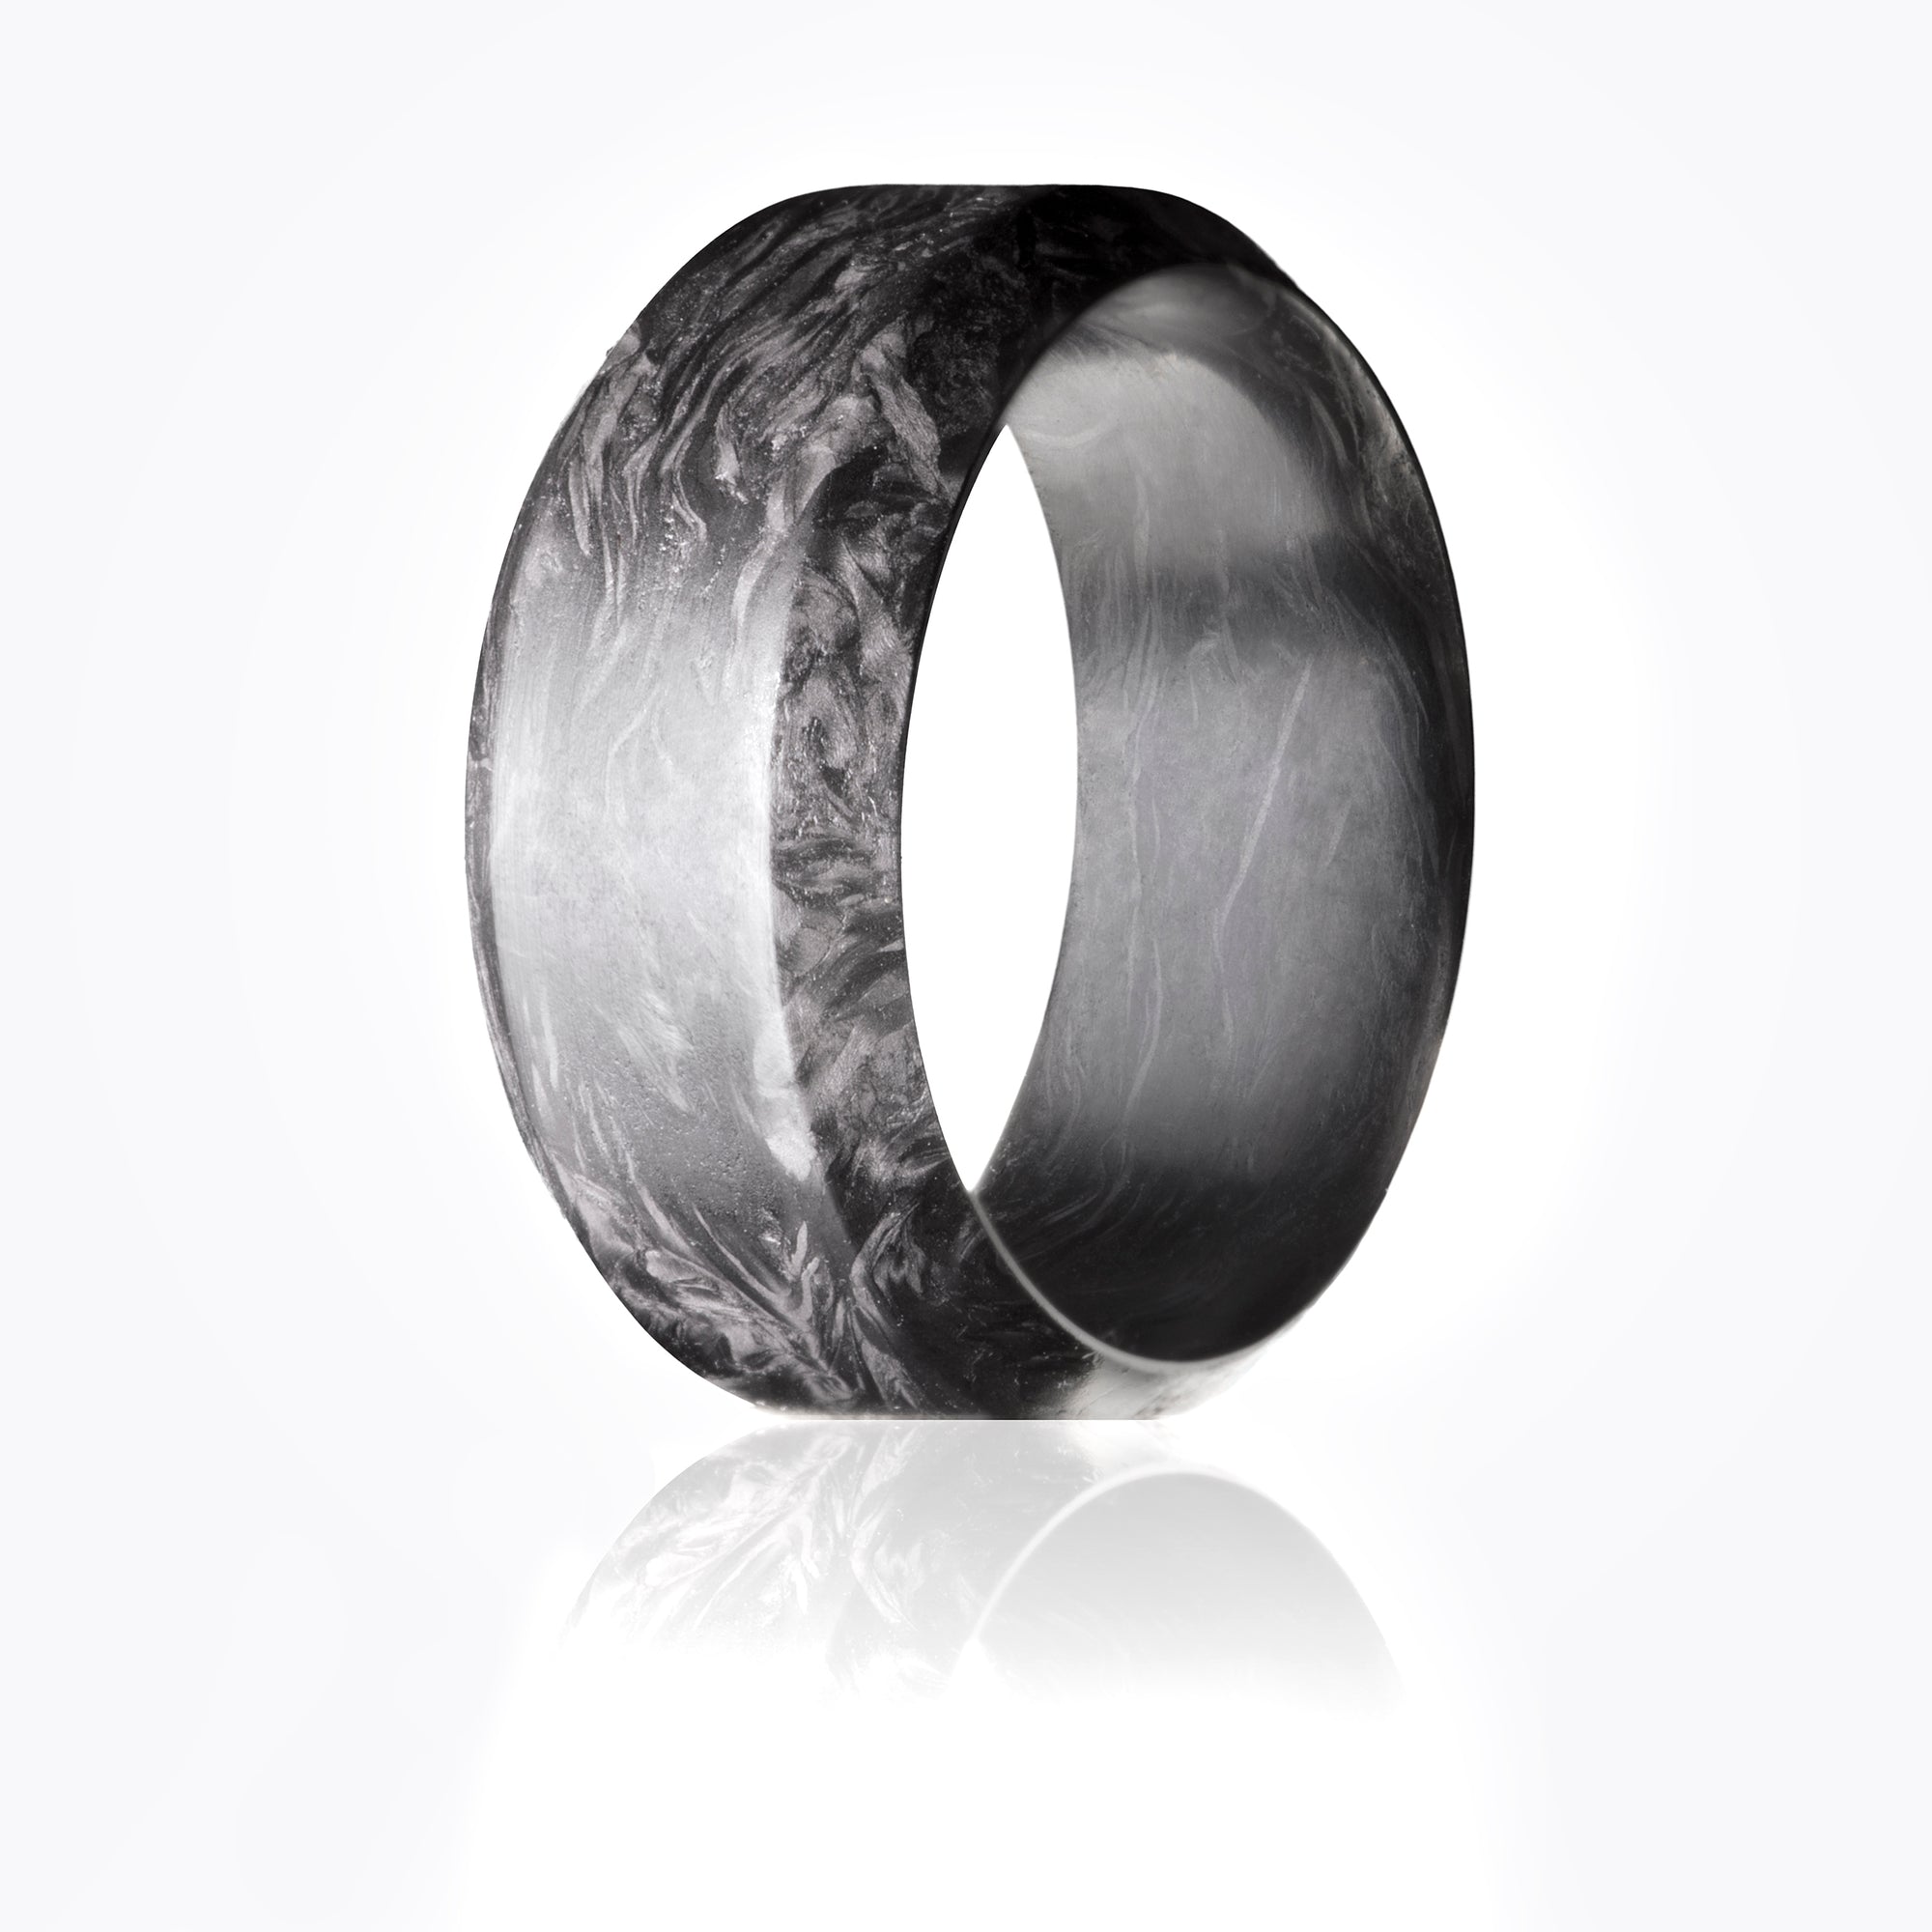 Forged Carbon 8mm ring with beveled edges.